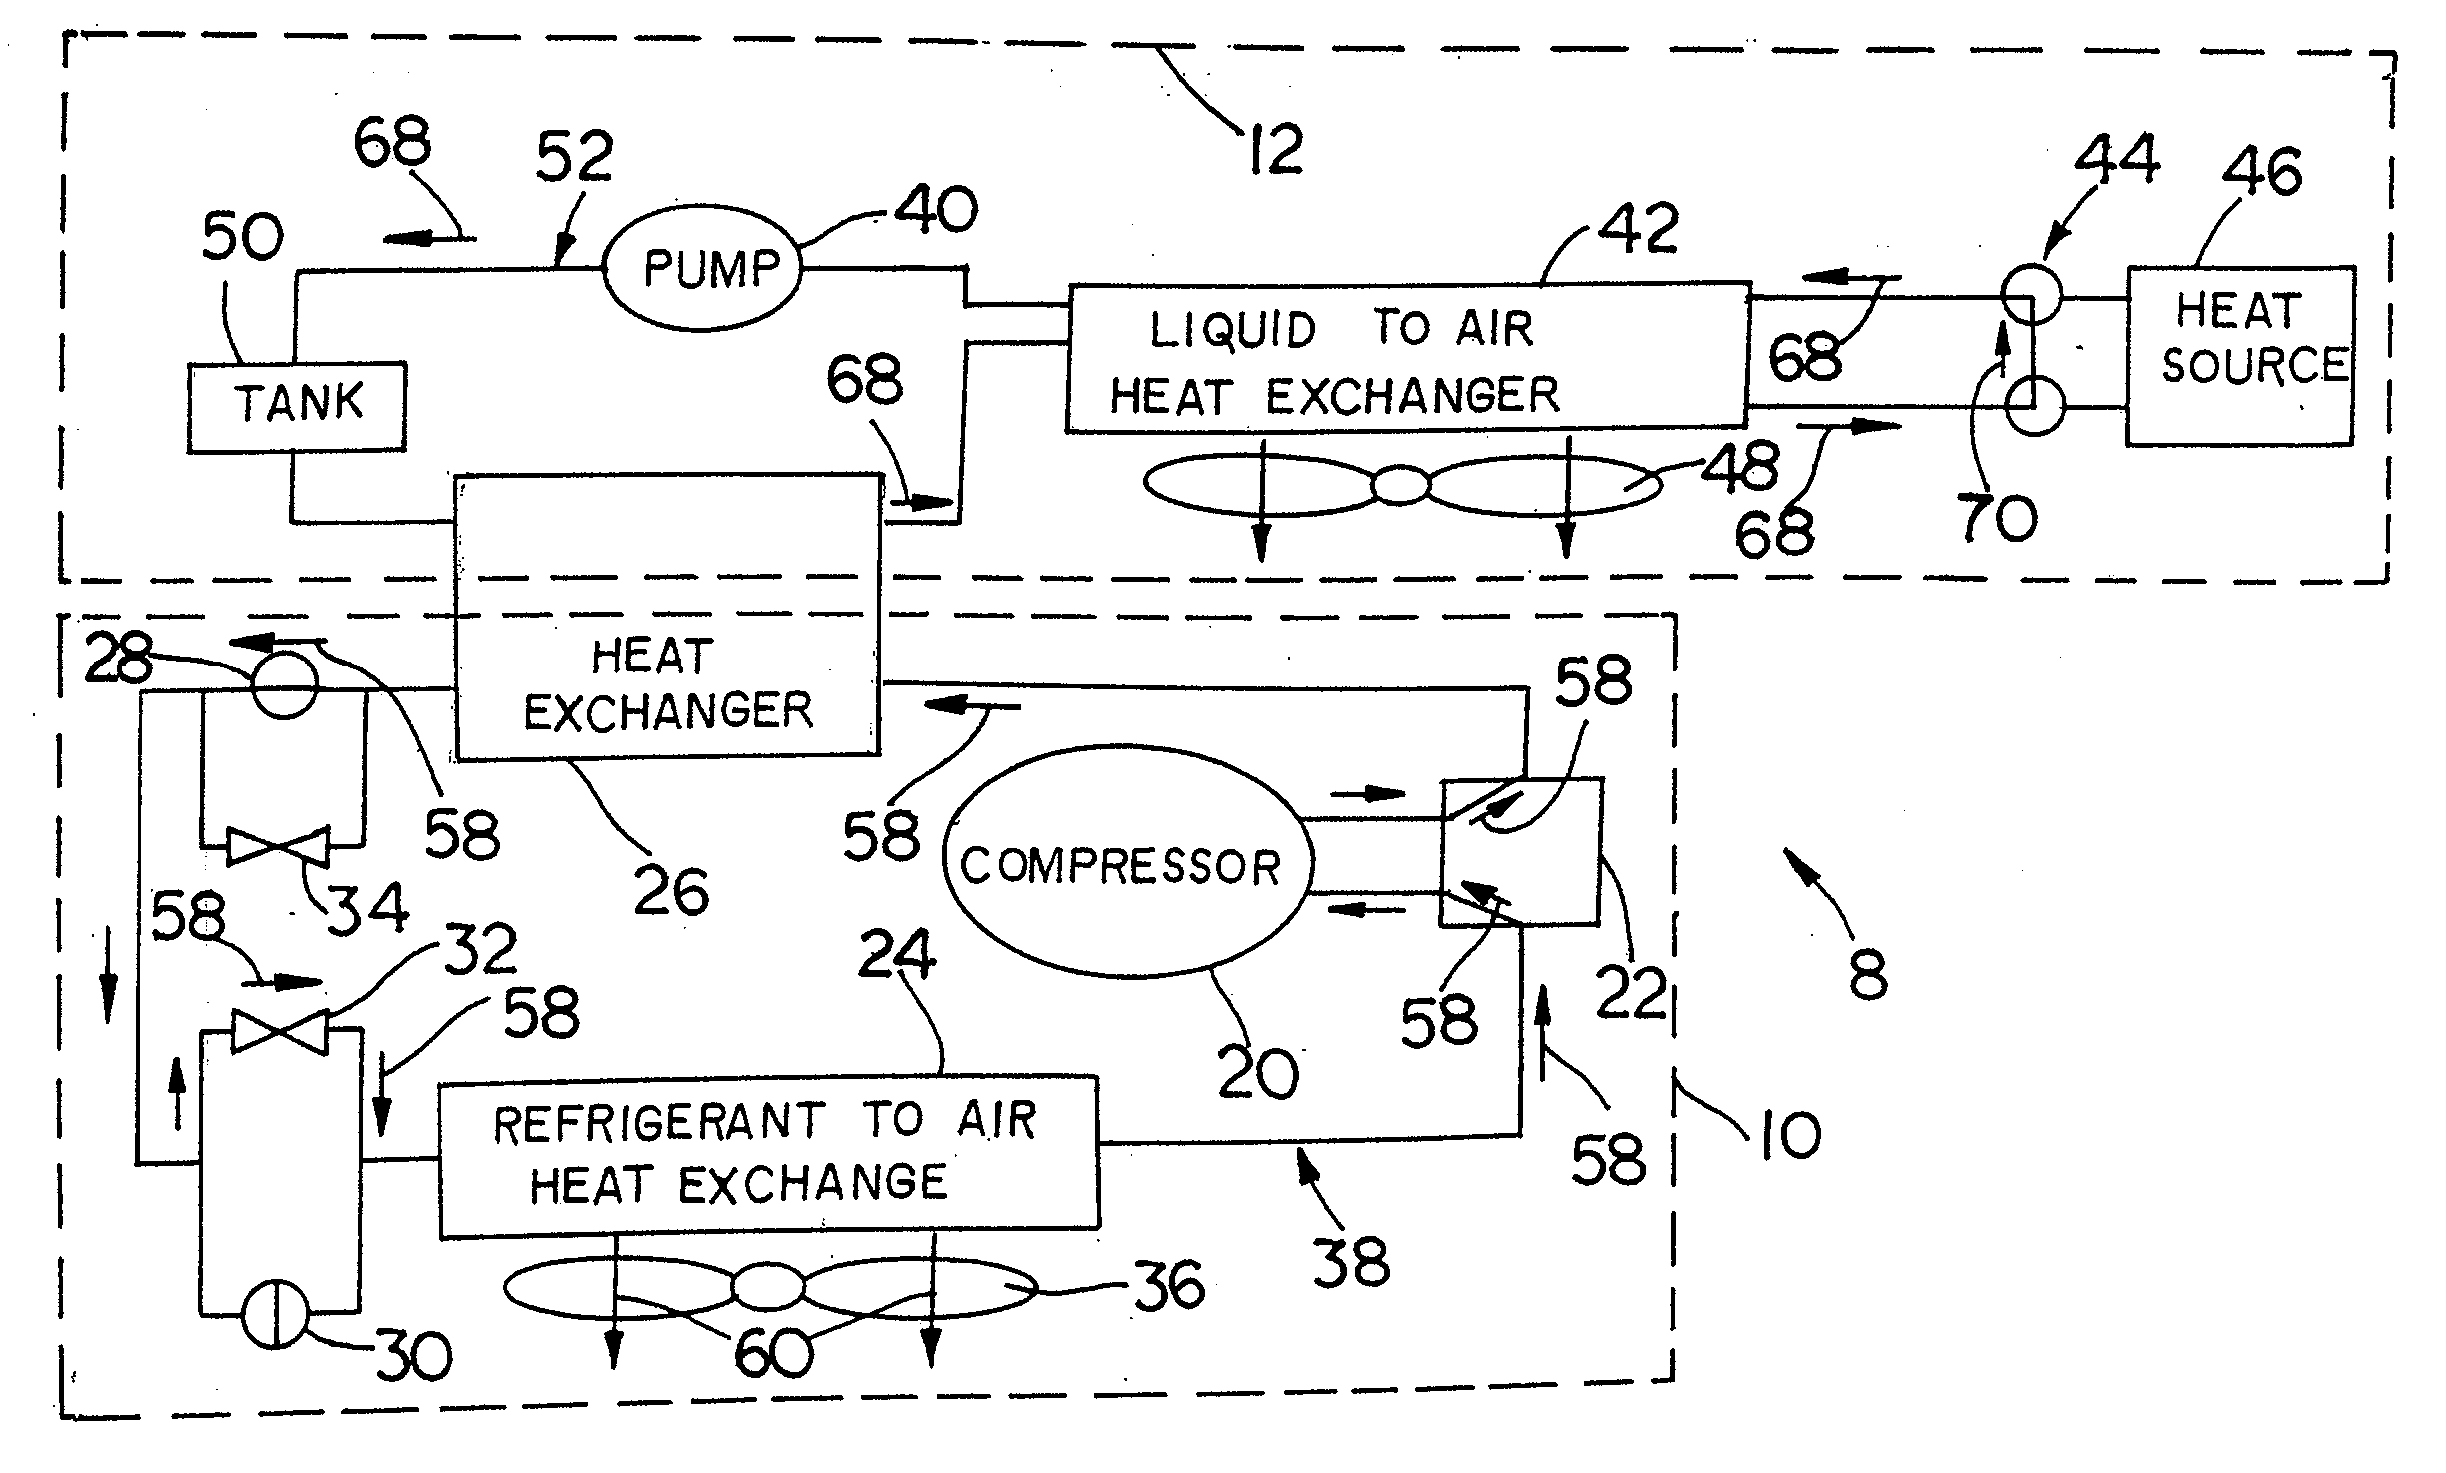 Combined Heating & Air Conditioning System for Buses Utilizing an Electrified Compressor Having a Modular High-Pressure Unit